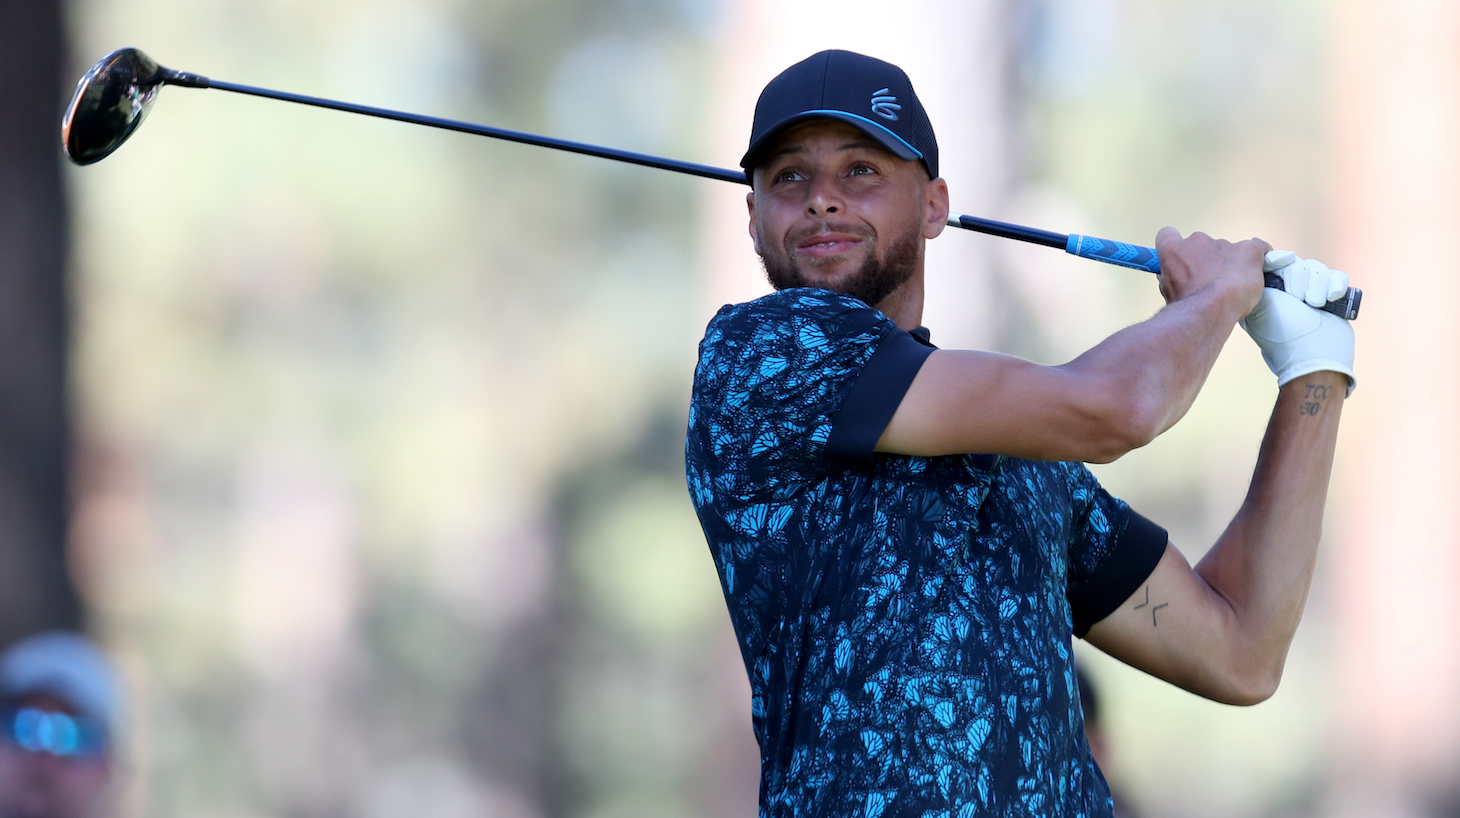 SOUTH LAKE TAHOE, NEVADA - JULY 11: NBA athlete Steph Curry tees off from the second hole during the final round of the American Century Championship at Edgewood Tahoe South golf course on July 11, 2020 in South Lake Tahoe, Nevada. (Photo by Jed Jacobsohn/Getty Images)